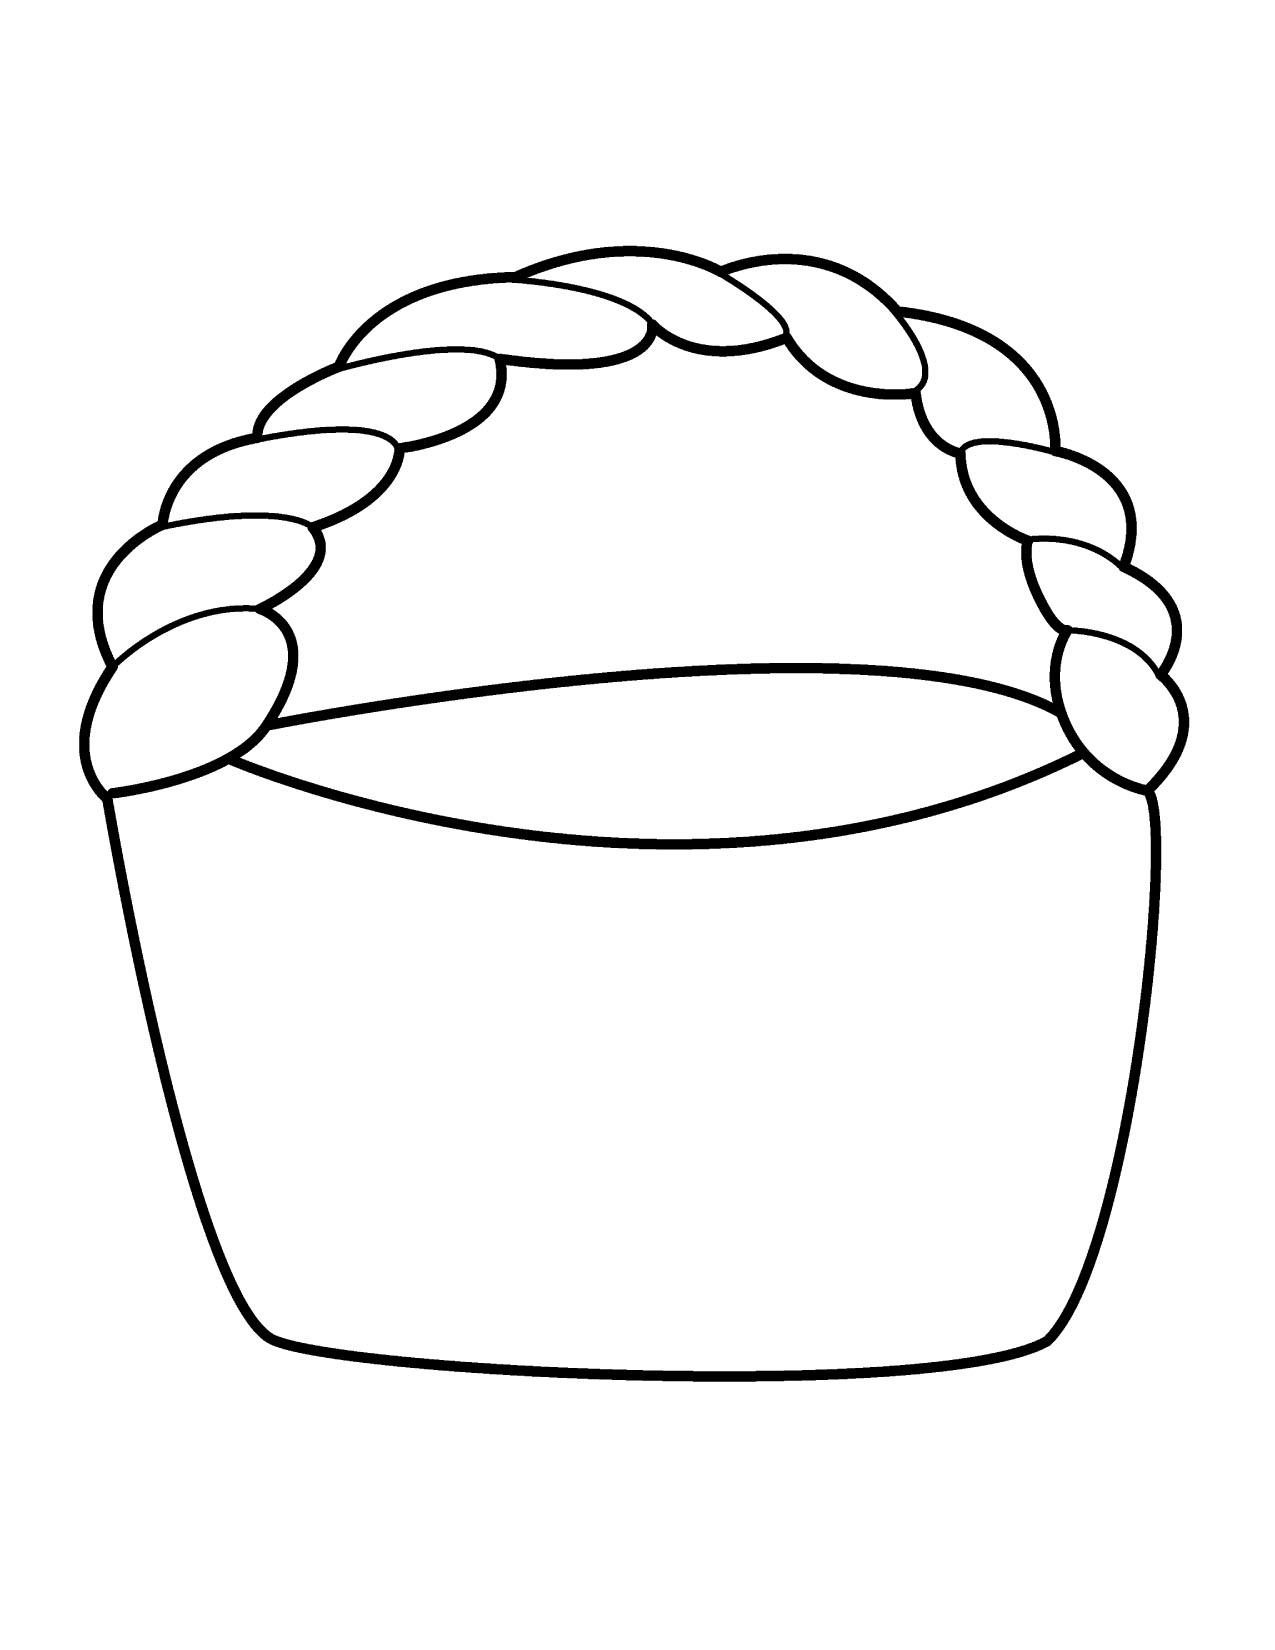 Apple Basket Black And White Clipart 